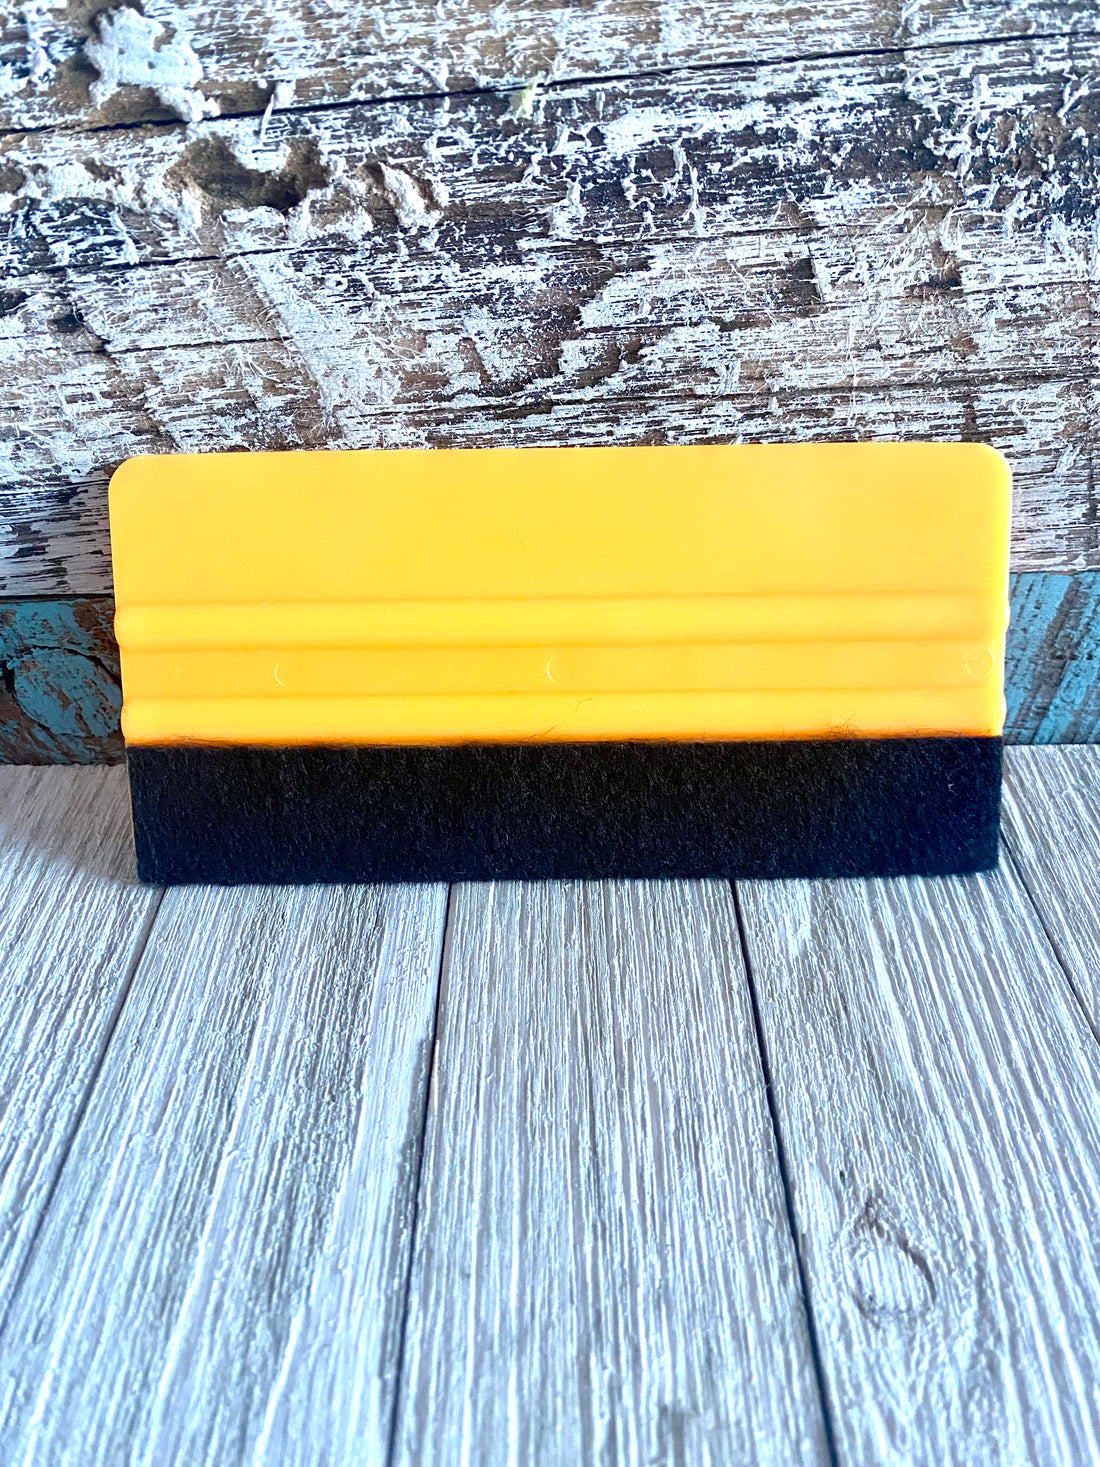 Squeegee, Yellow, Felt, Vinyl Application, Signage Tools, Graphics Installation, Vinyl Wrapping, Professional Sign Tools, Application Accessories, Squeegee with Felt Edge, High-Quality Sign Supplies, Graphics Handling,